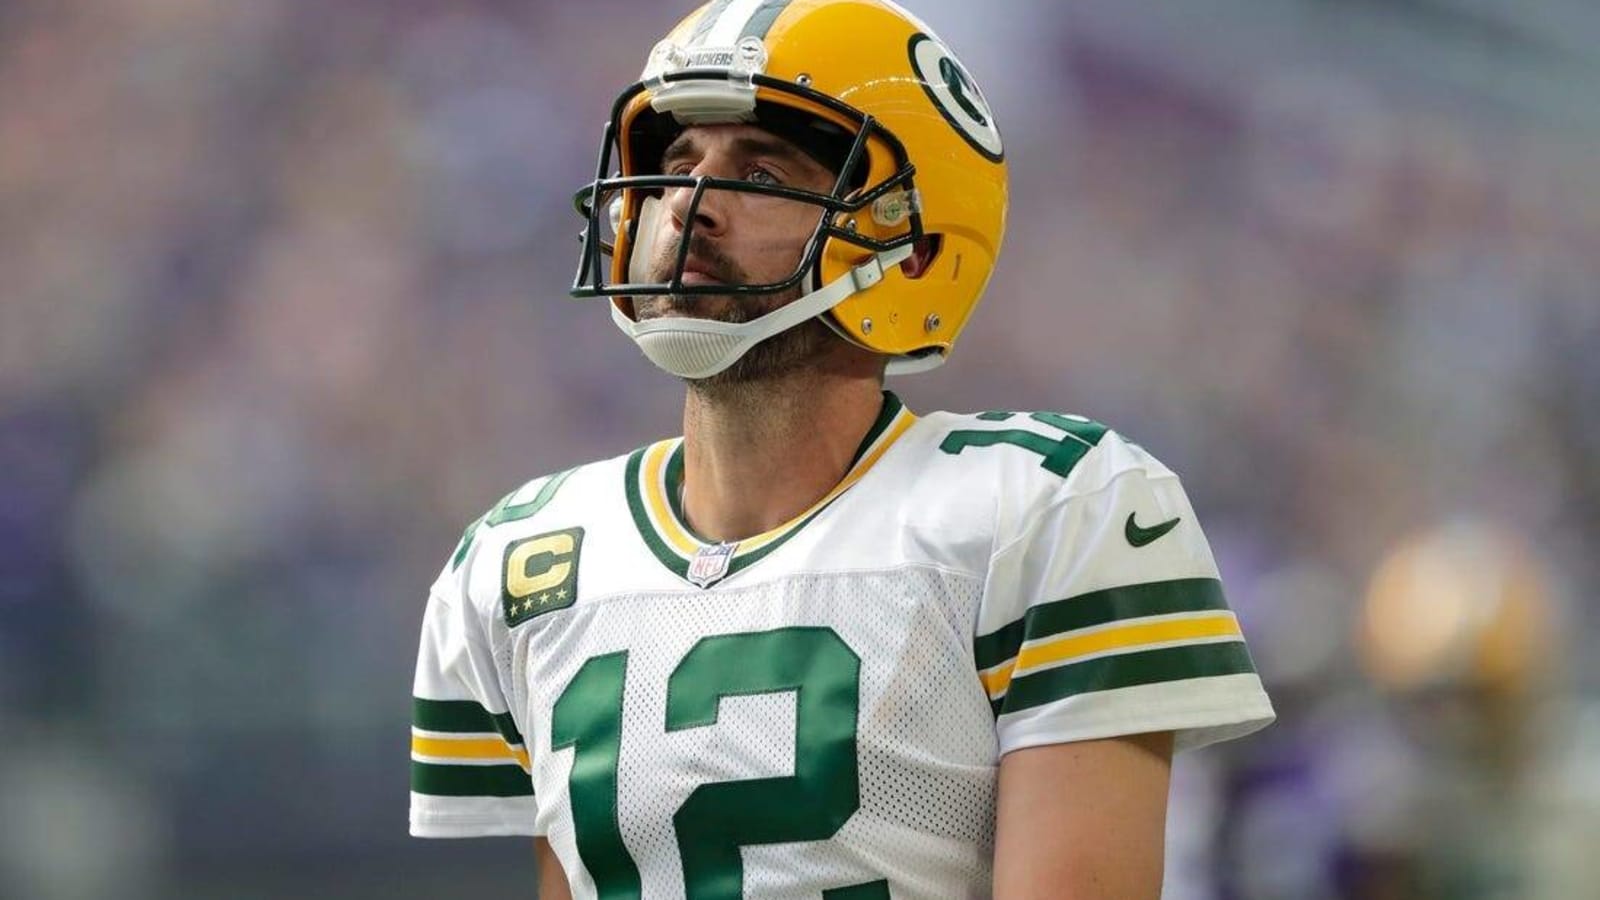 Packers CEO: Still no answers on potential Aaron Rodgers trade